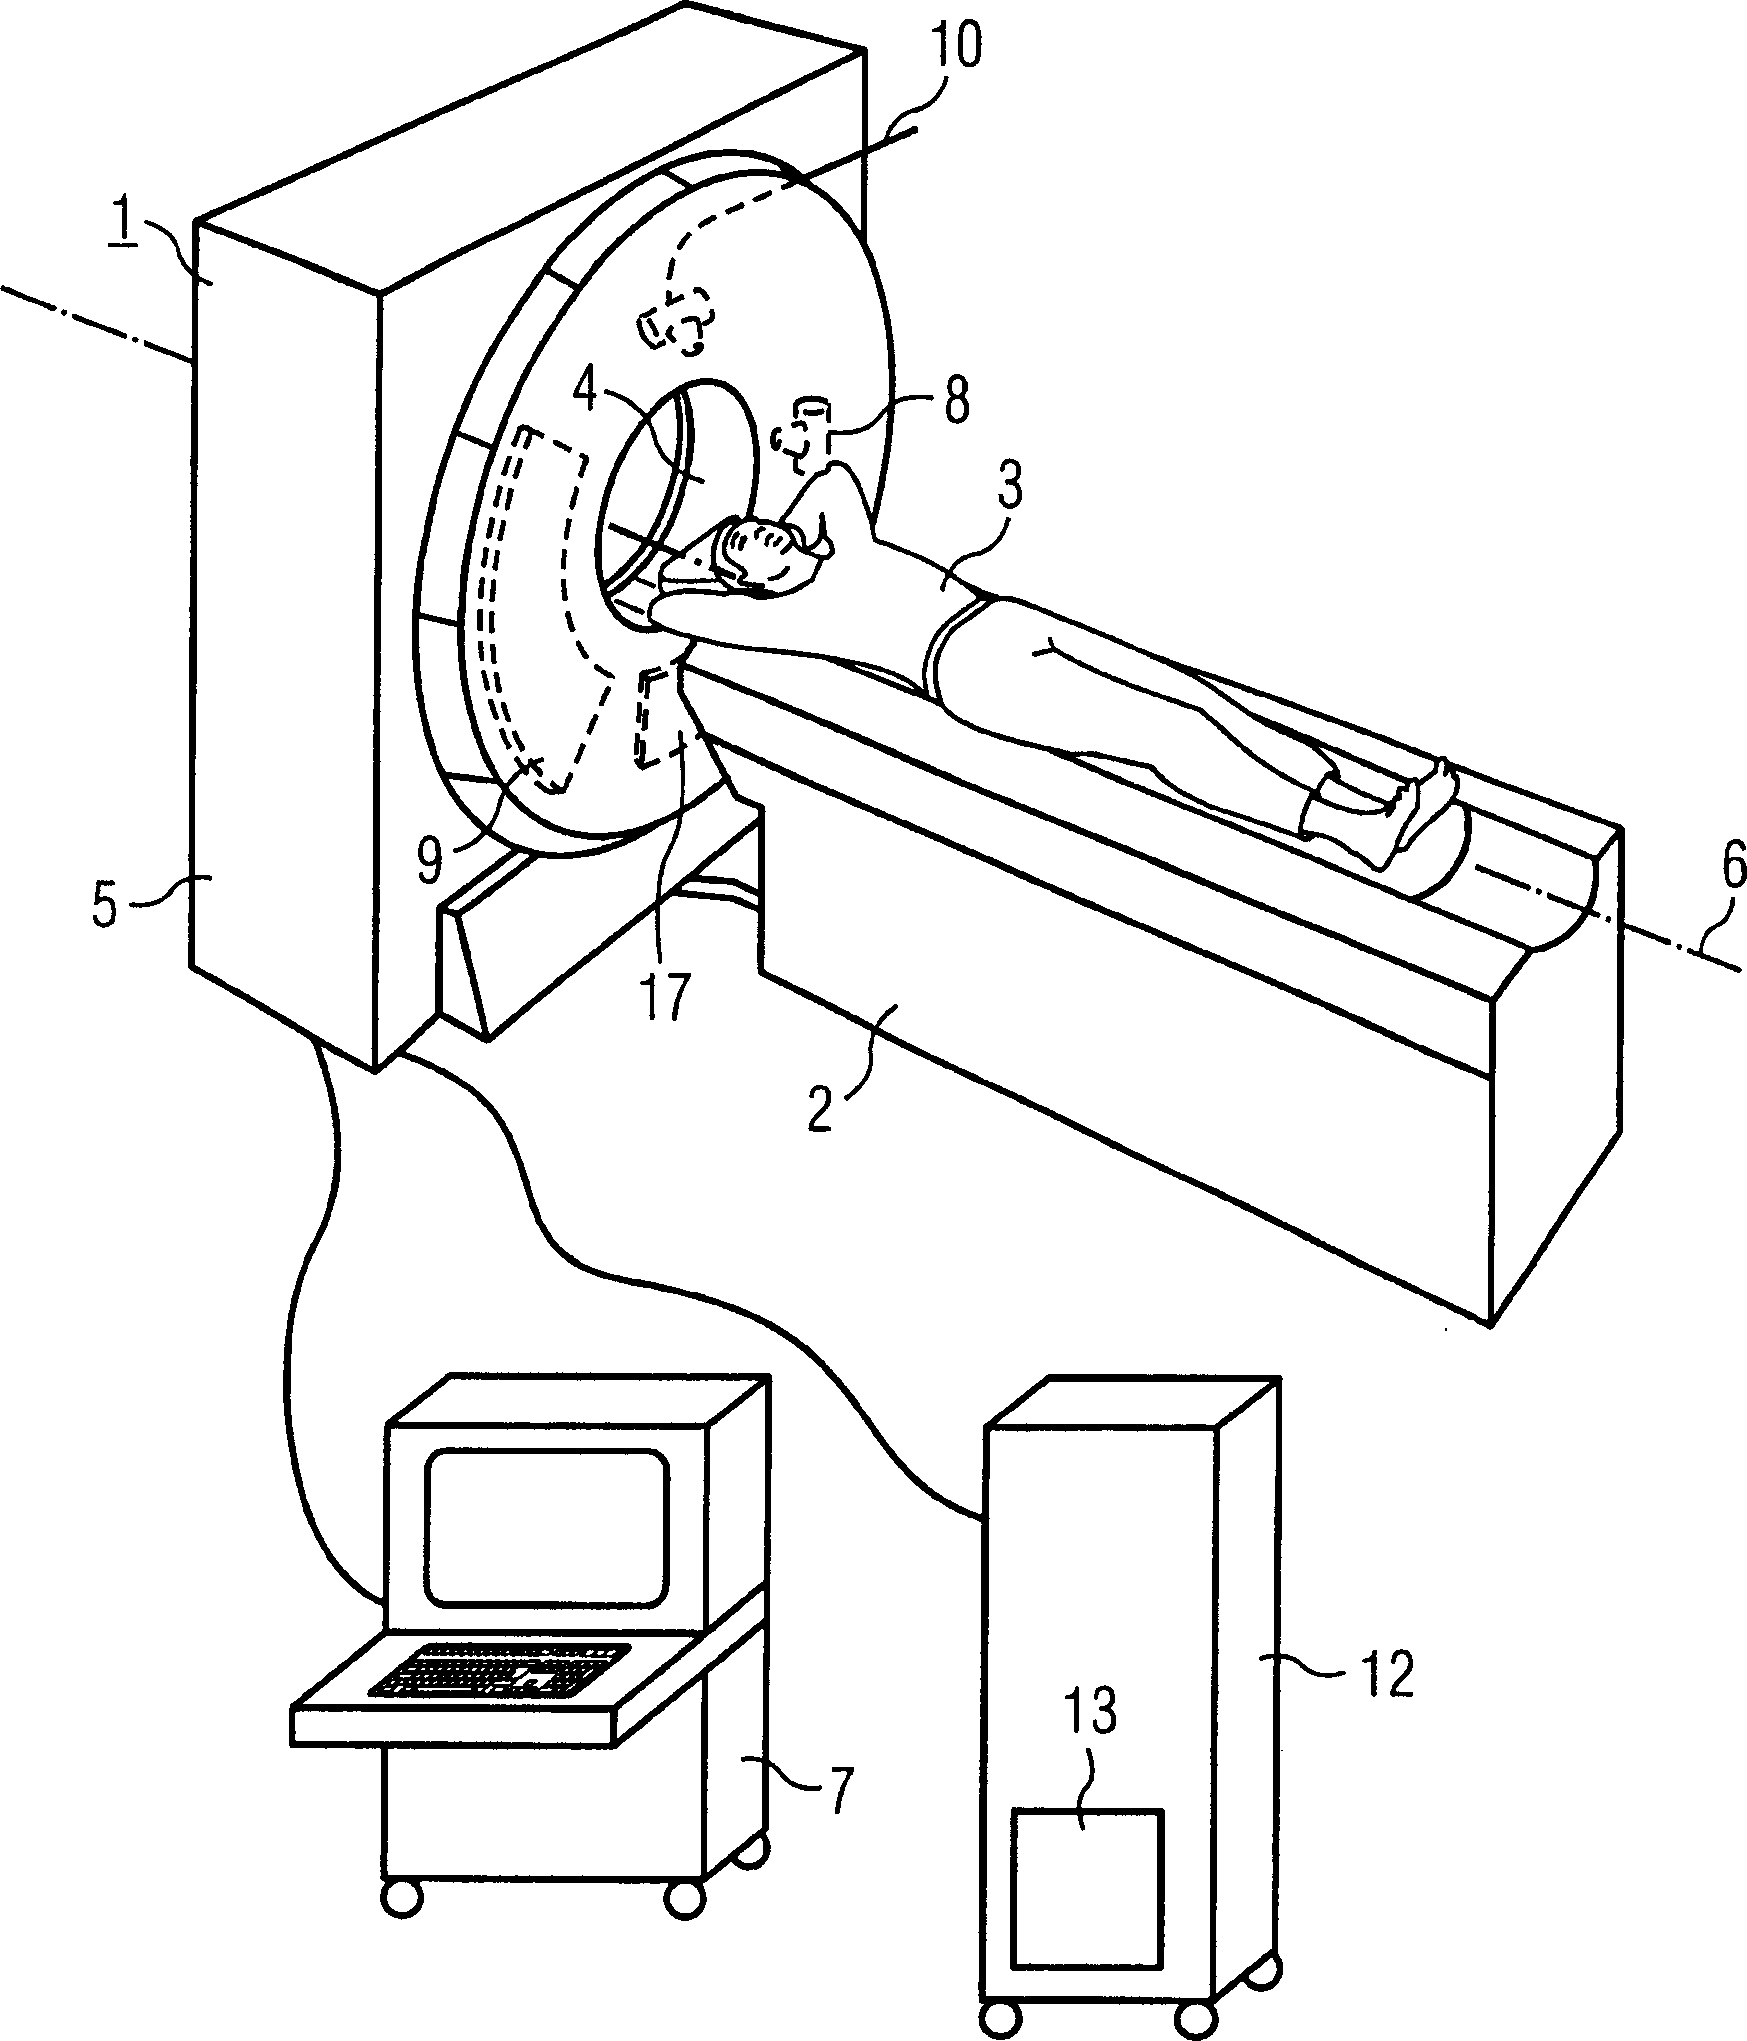 Imaging method and apparatus for visualizing coronary heart diseases, in particular instances of myocardial infarction damage